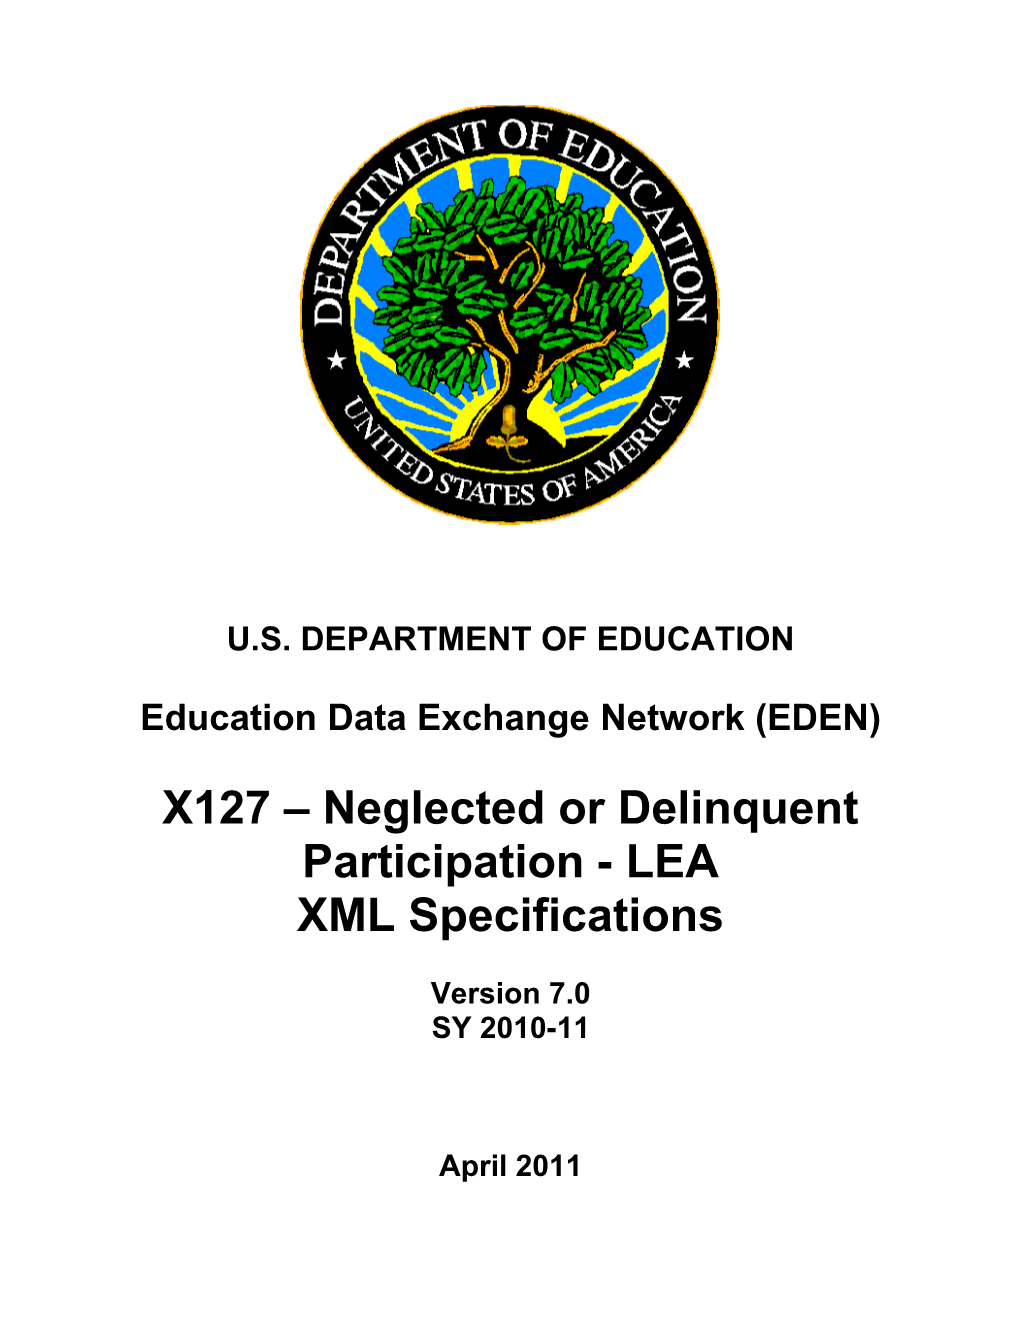 Neglected Or Delinquent Participation - LEA XML Specifications